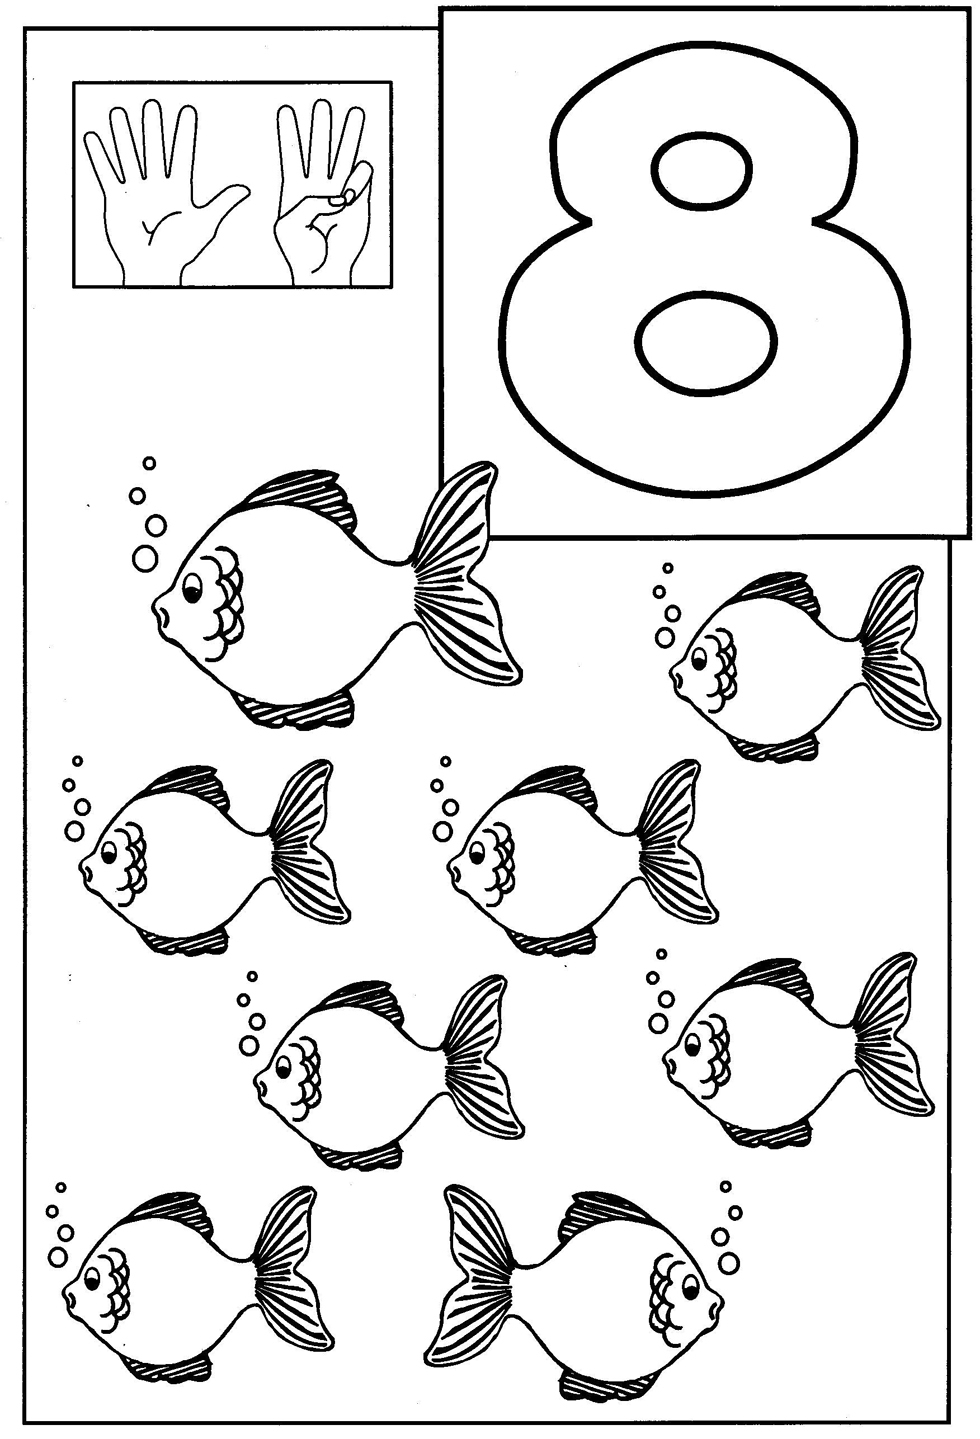 Number Coloring Pages Kids Color Sheets For Kindergarten Educations Gallery